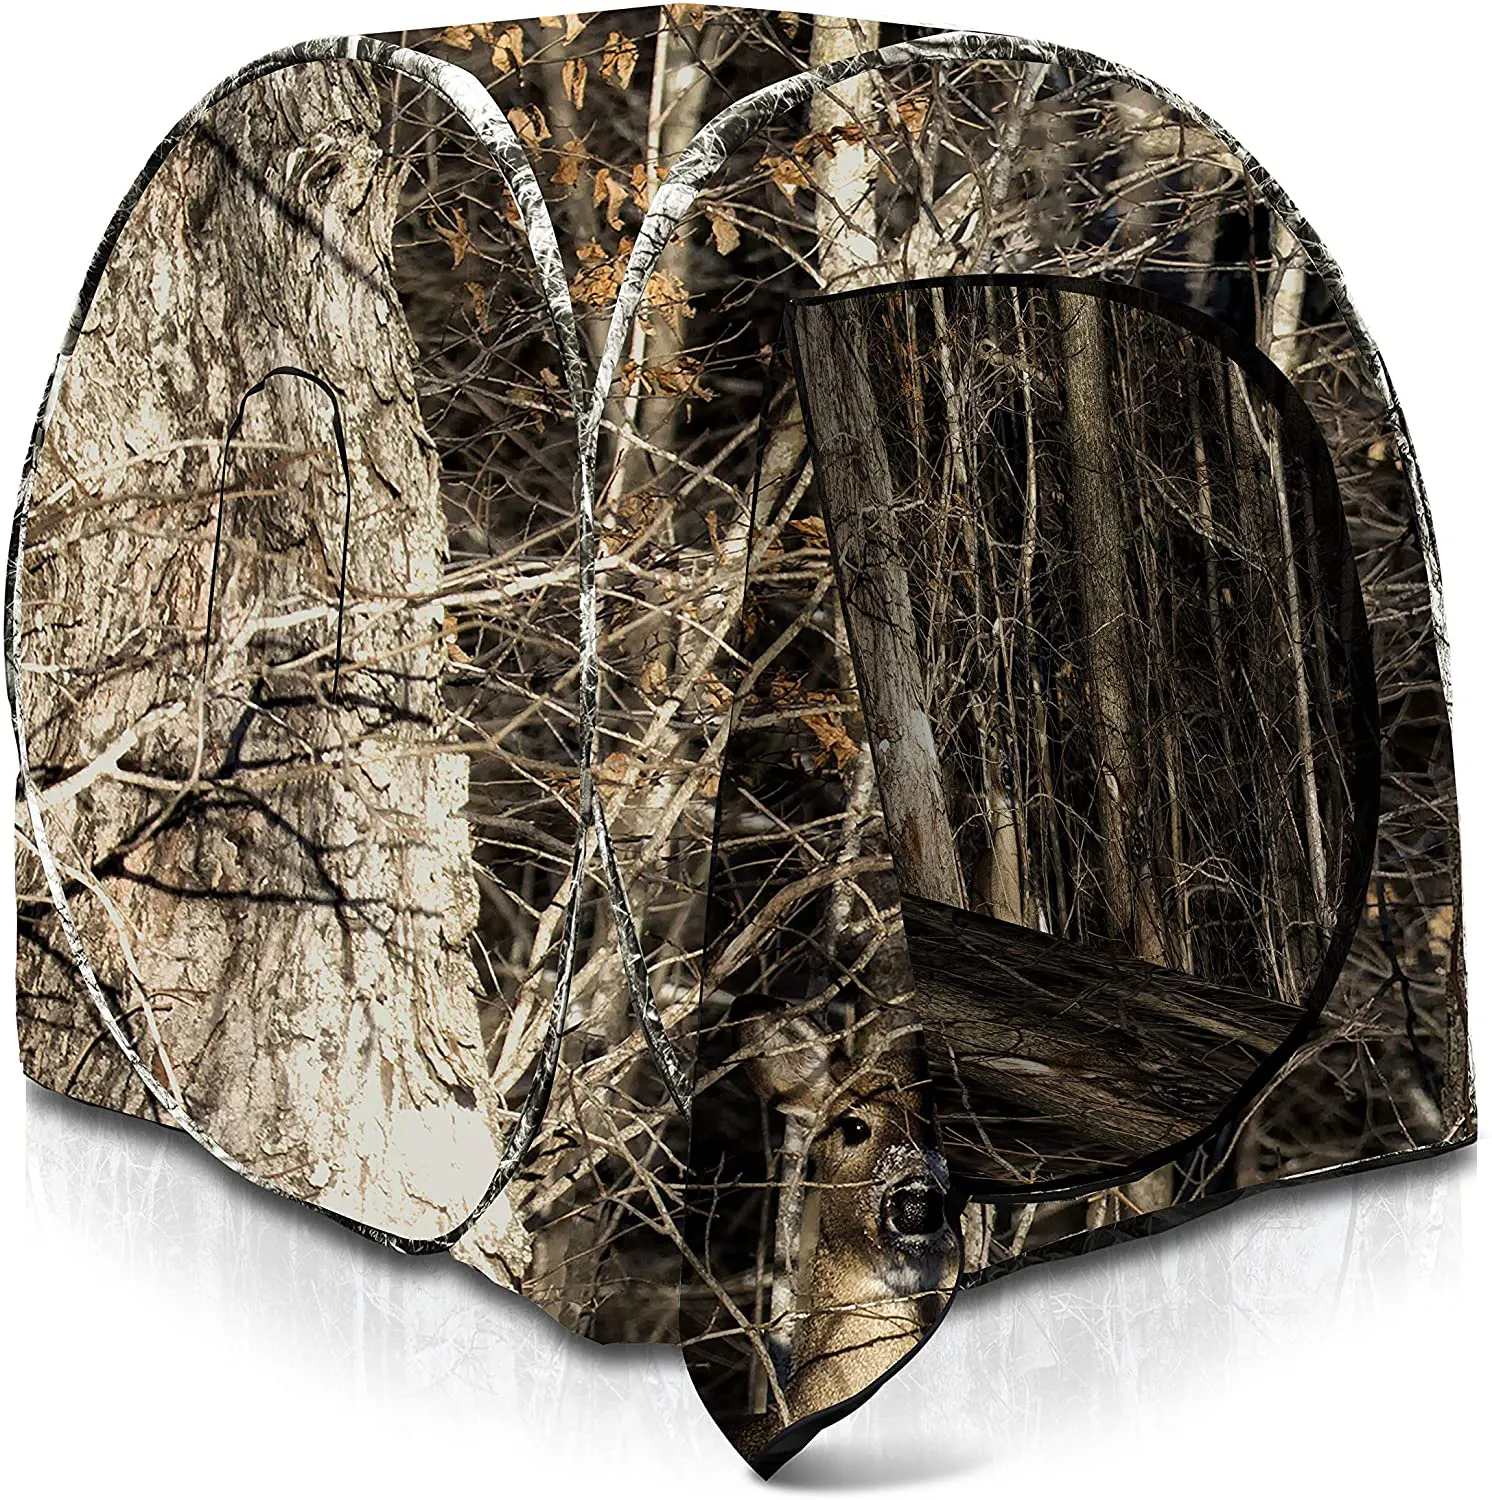 Super Magnum Pop-Up Hunting Ground Blind 2-4 Person Tent Hunting Gear Equipment And Accessories 6-Panel Spring Steel